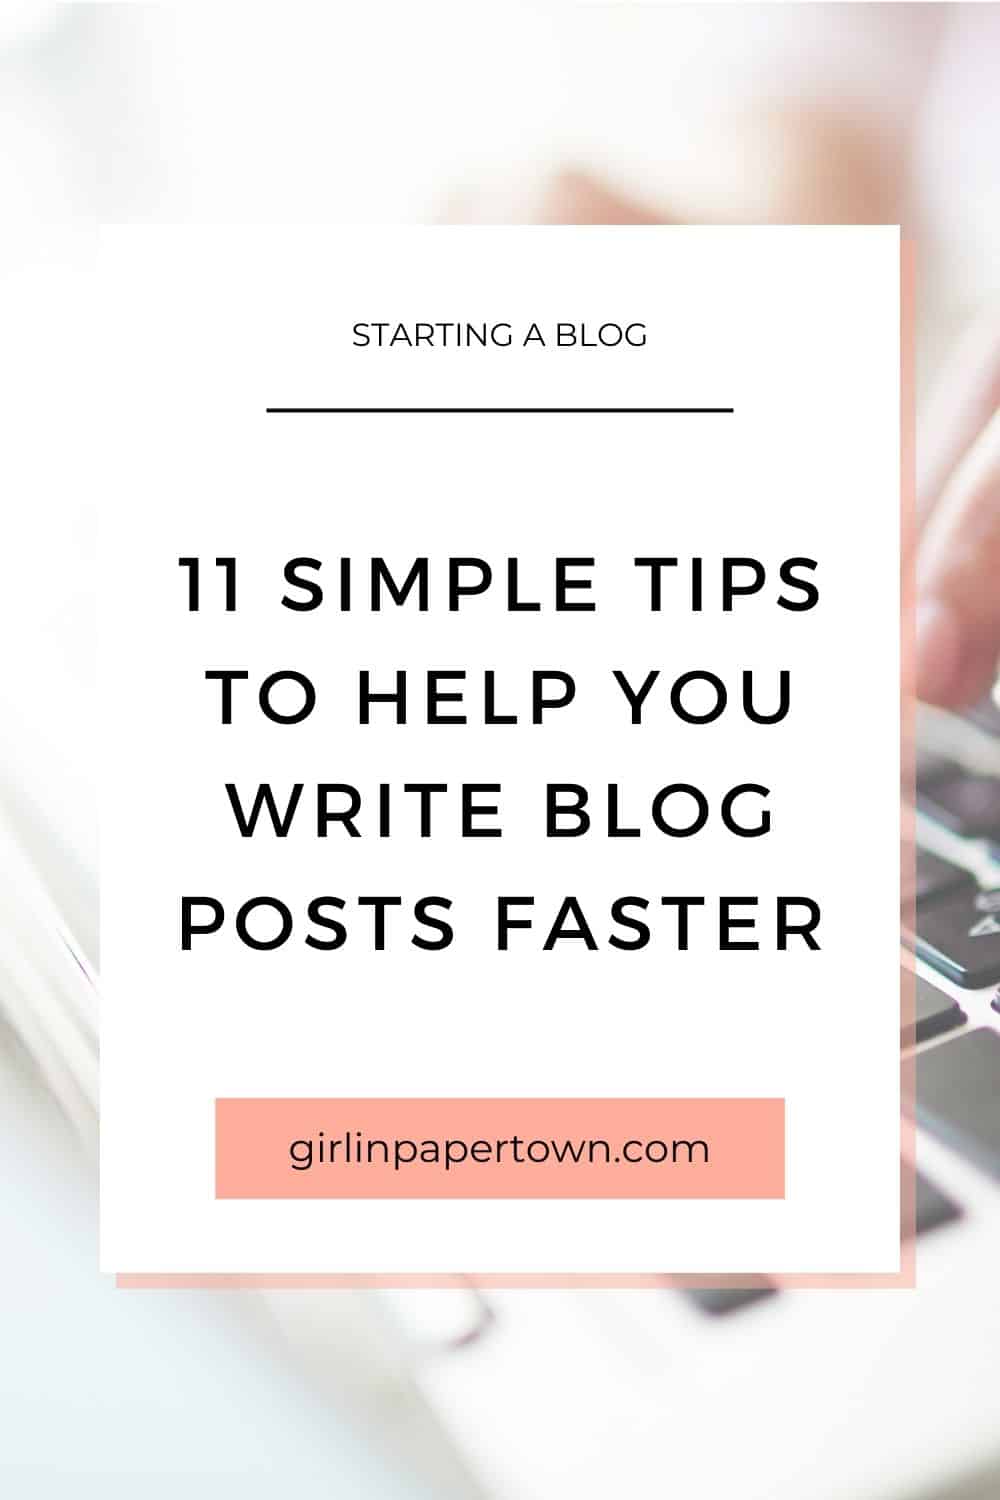 Starting a blog - 11 simple tips to help you write blog posts faster